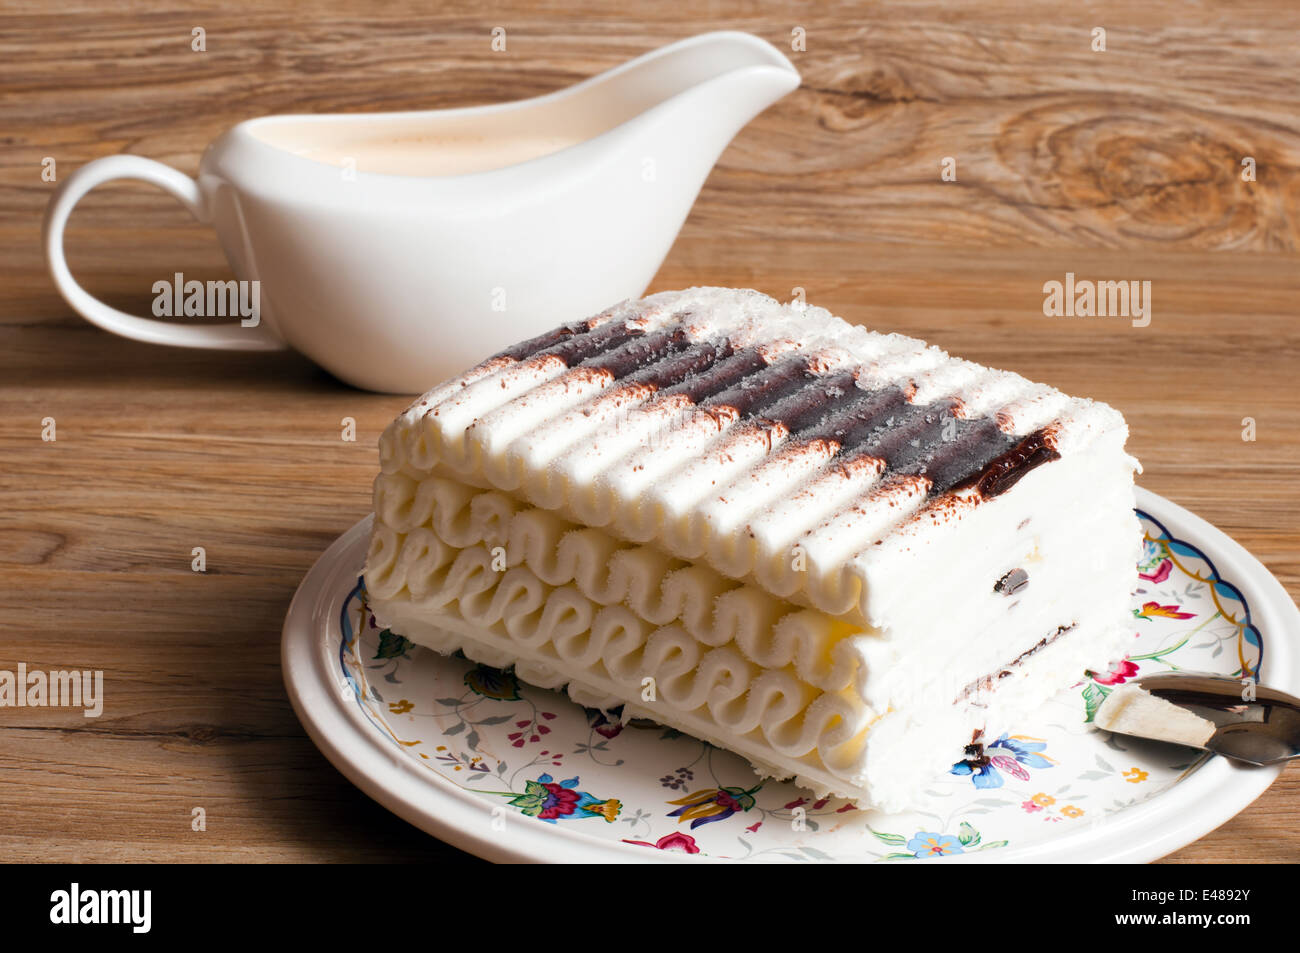 ice cake chocolate butter cream dessert piece roll big eating food ready meal treat table spoon gravy boat pattern nobody Stock Photo